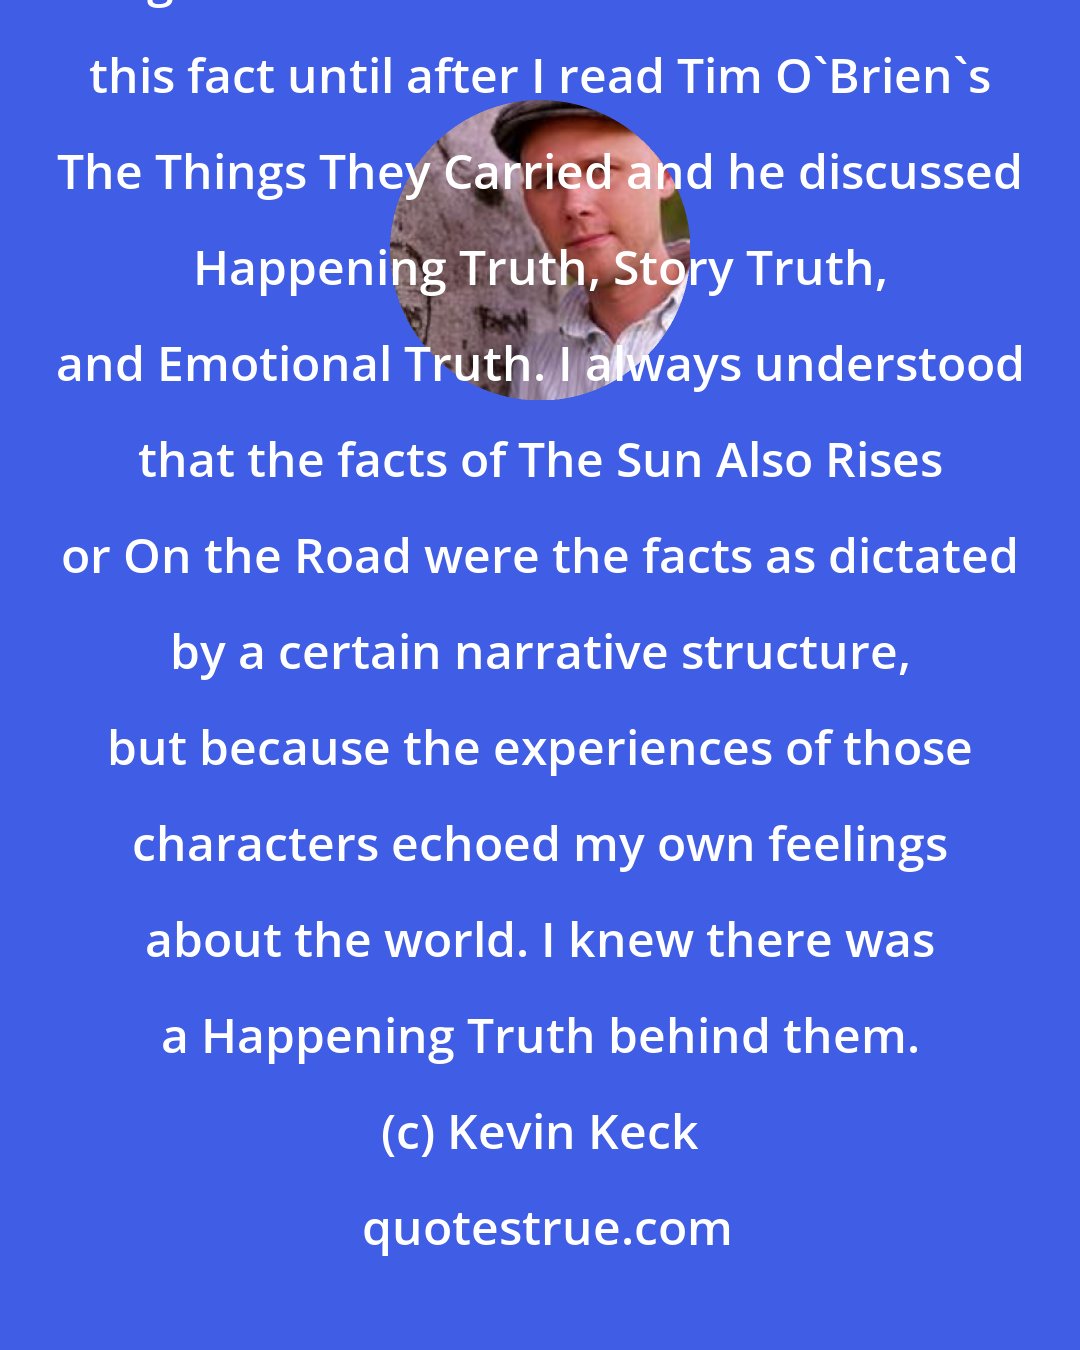 Kevin Keck: In fact, I always assumed that most everything I read was true, to one degree or another. I couldn't articulate this fact until after I read Tim O'Brien's The Things They Carried and he discussed Happening Truth, Story Truth, and Emotional Truth. I always understood that the facts of The Sun Also Rises or On the Road were the facts as dictated by a certain narrative structure, but because the experiences of those characters echoed my own feelings about the world. I knew there was a Happening Truth behind them.